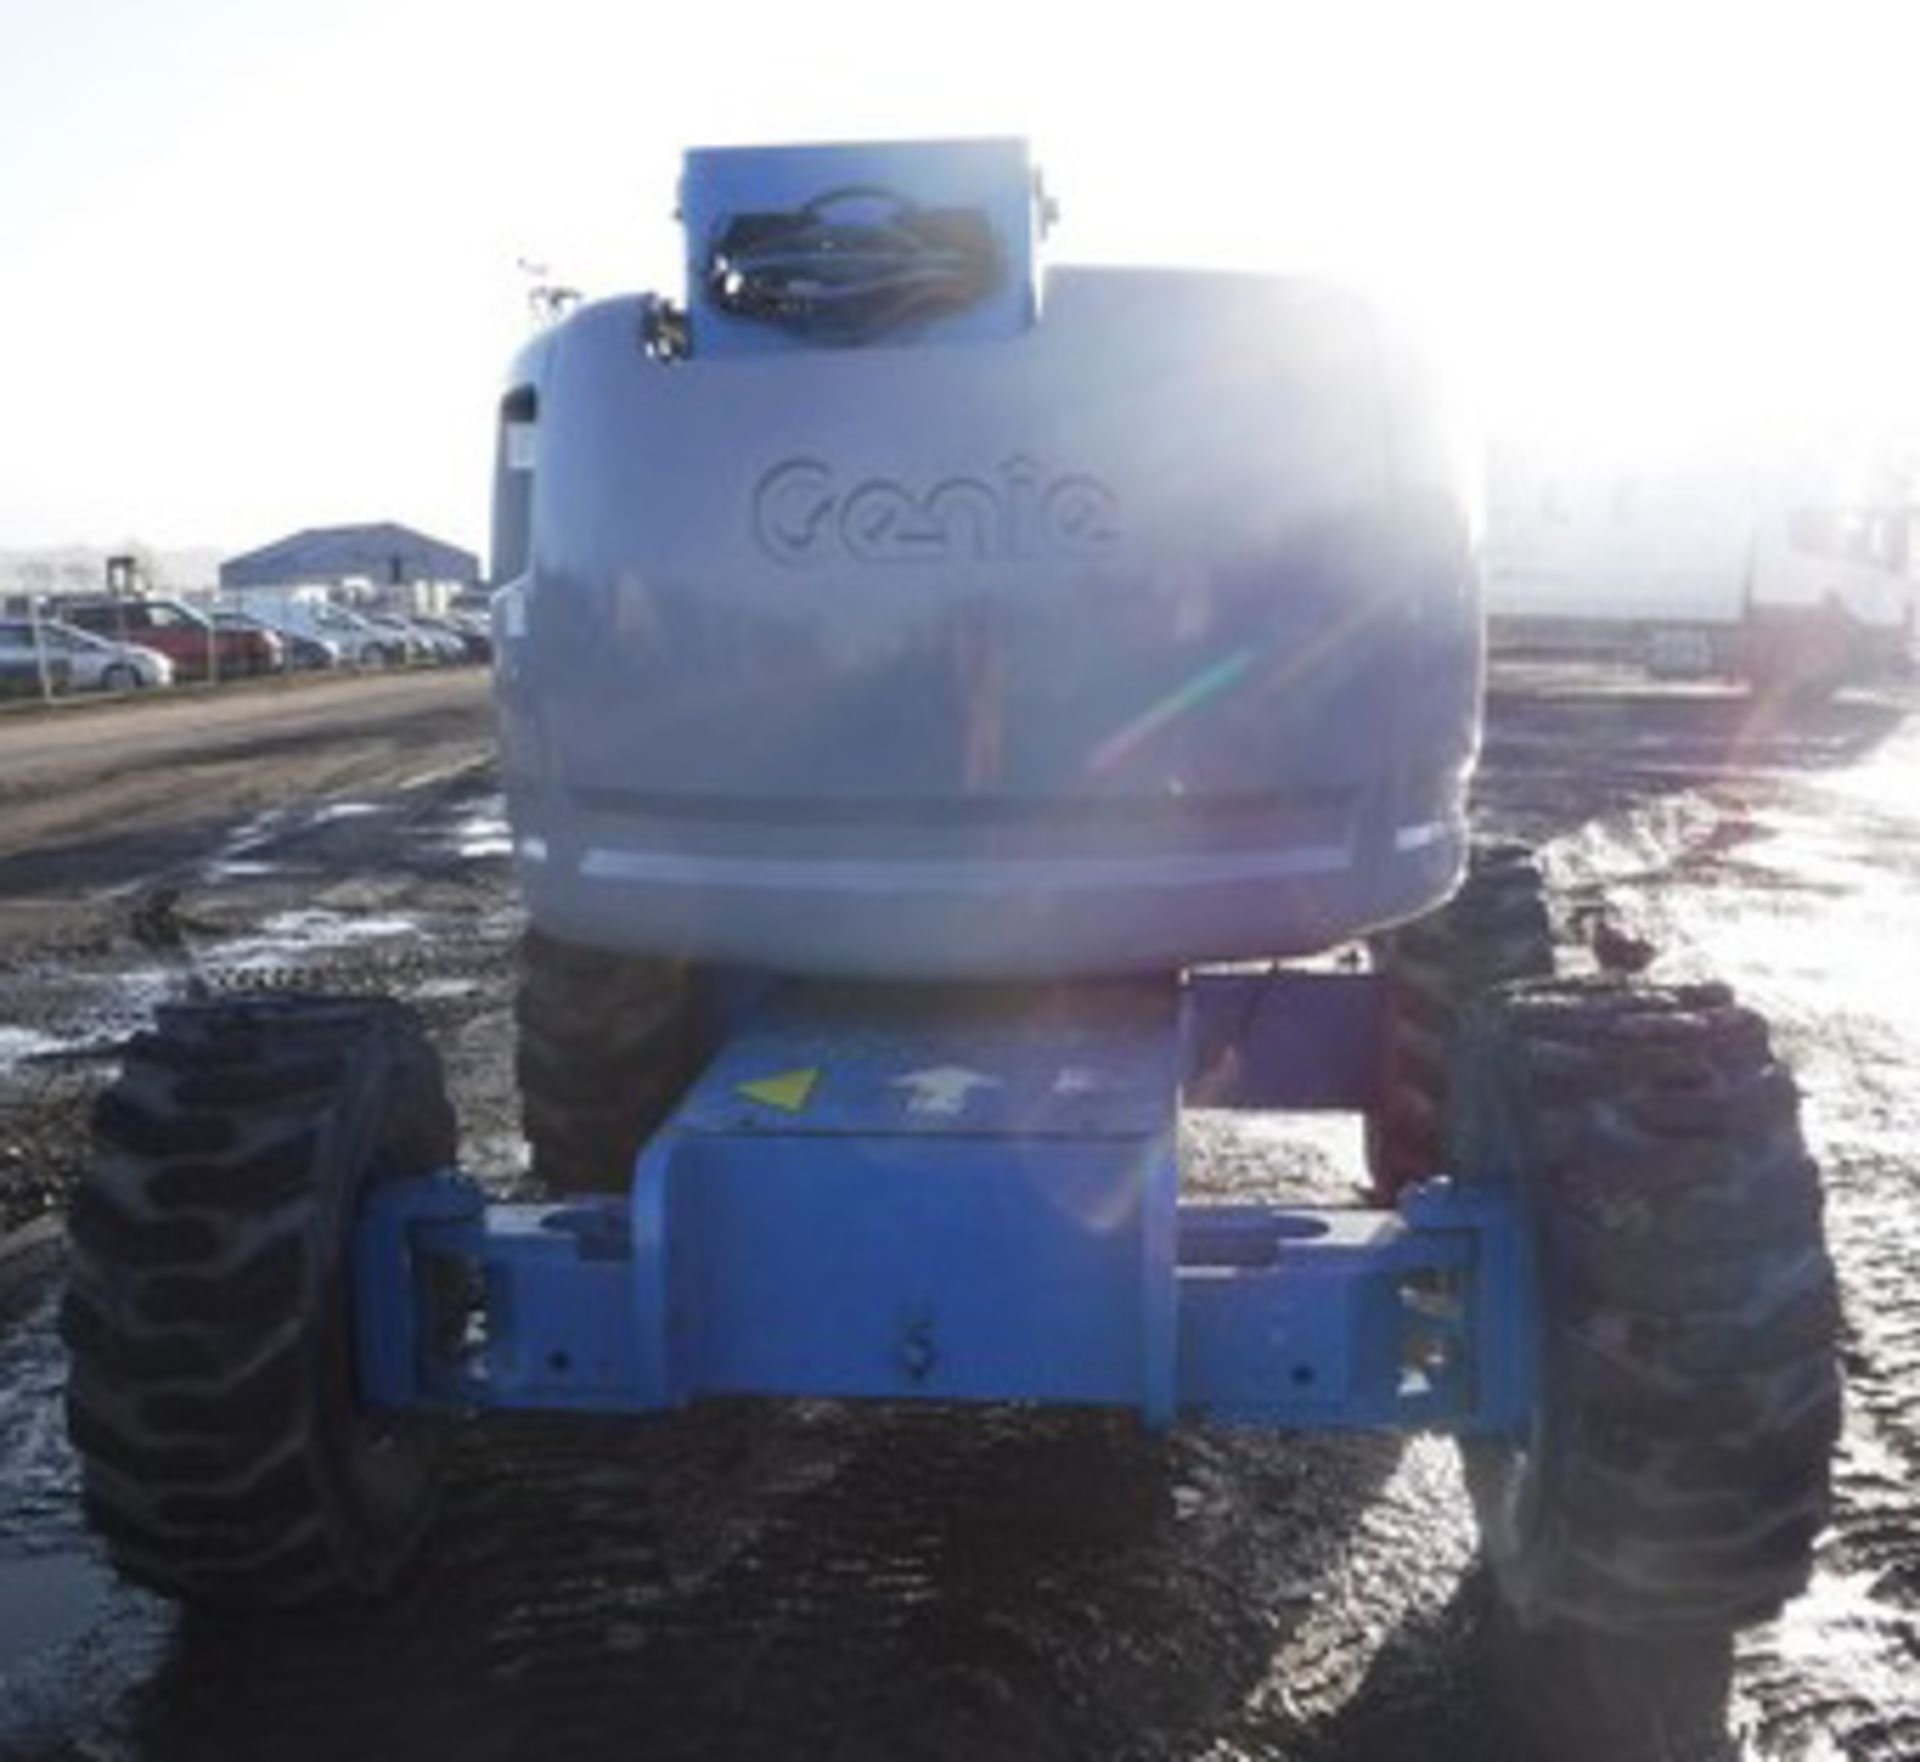 2000 GENIE MODEL Z45-25, S/N 15155, 8046HRS (NOT VERIFIED), LIFT CAPACITY - 230 - Image 15 of 17